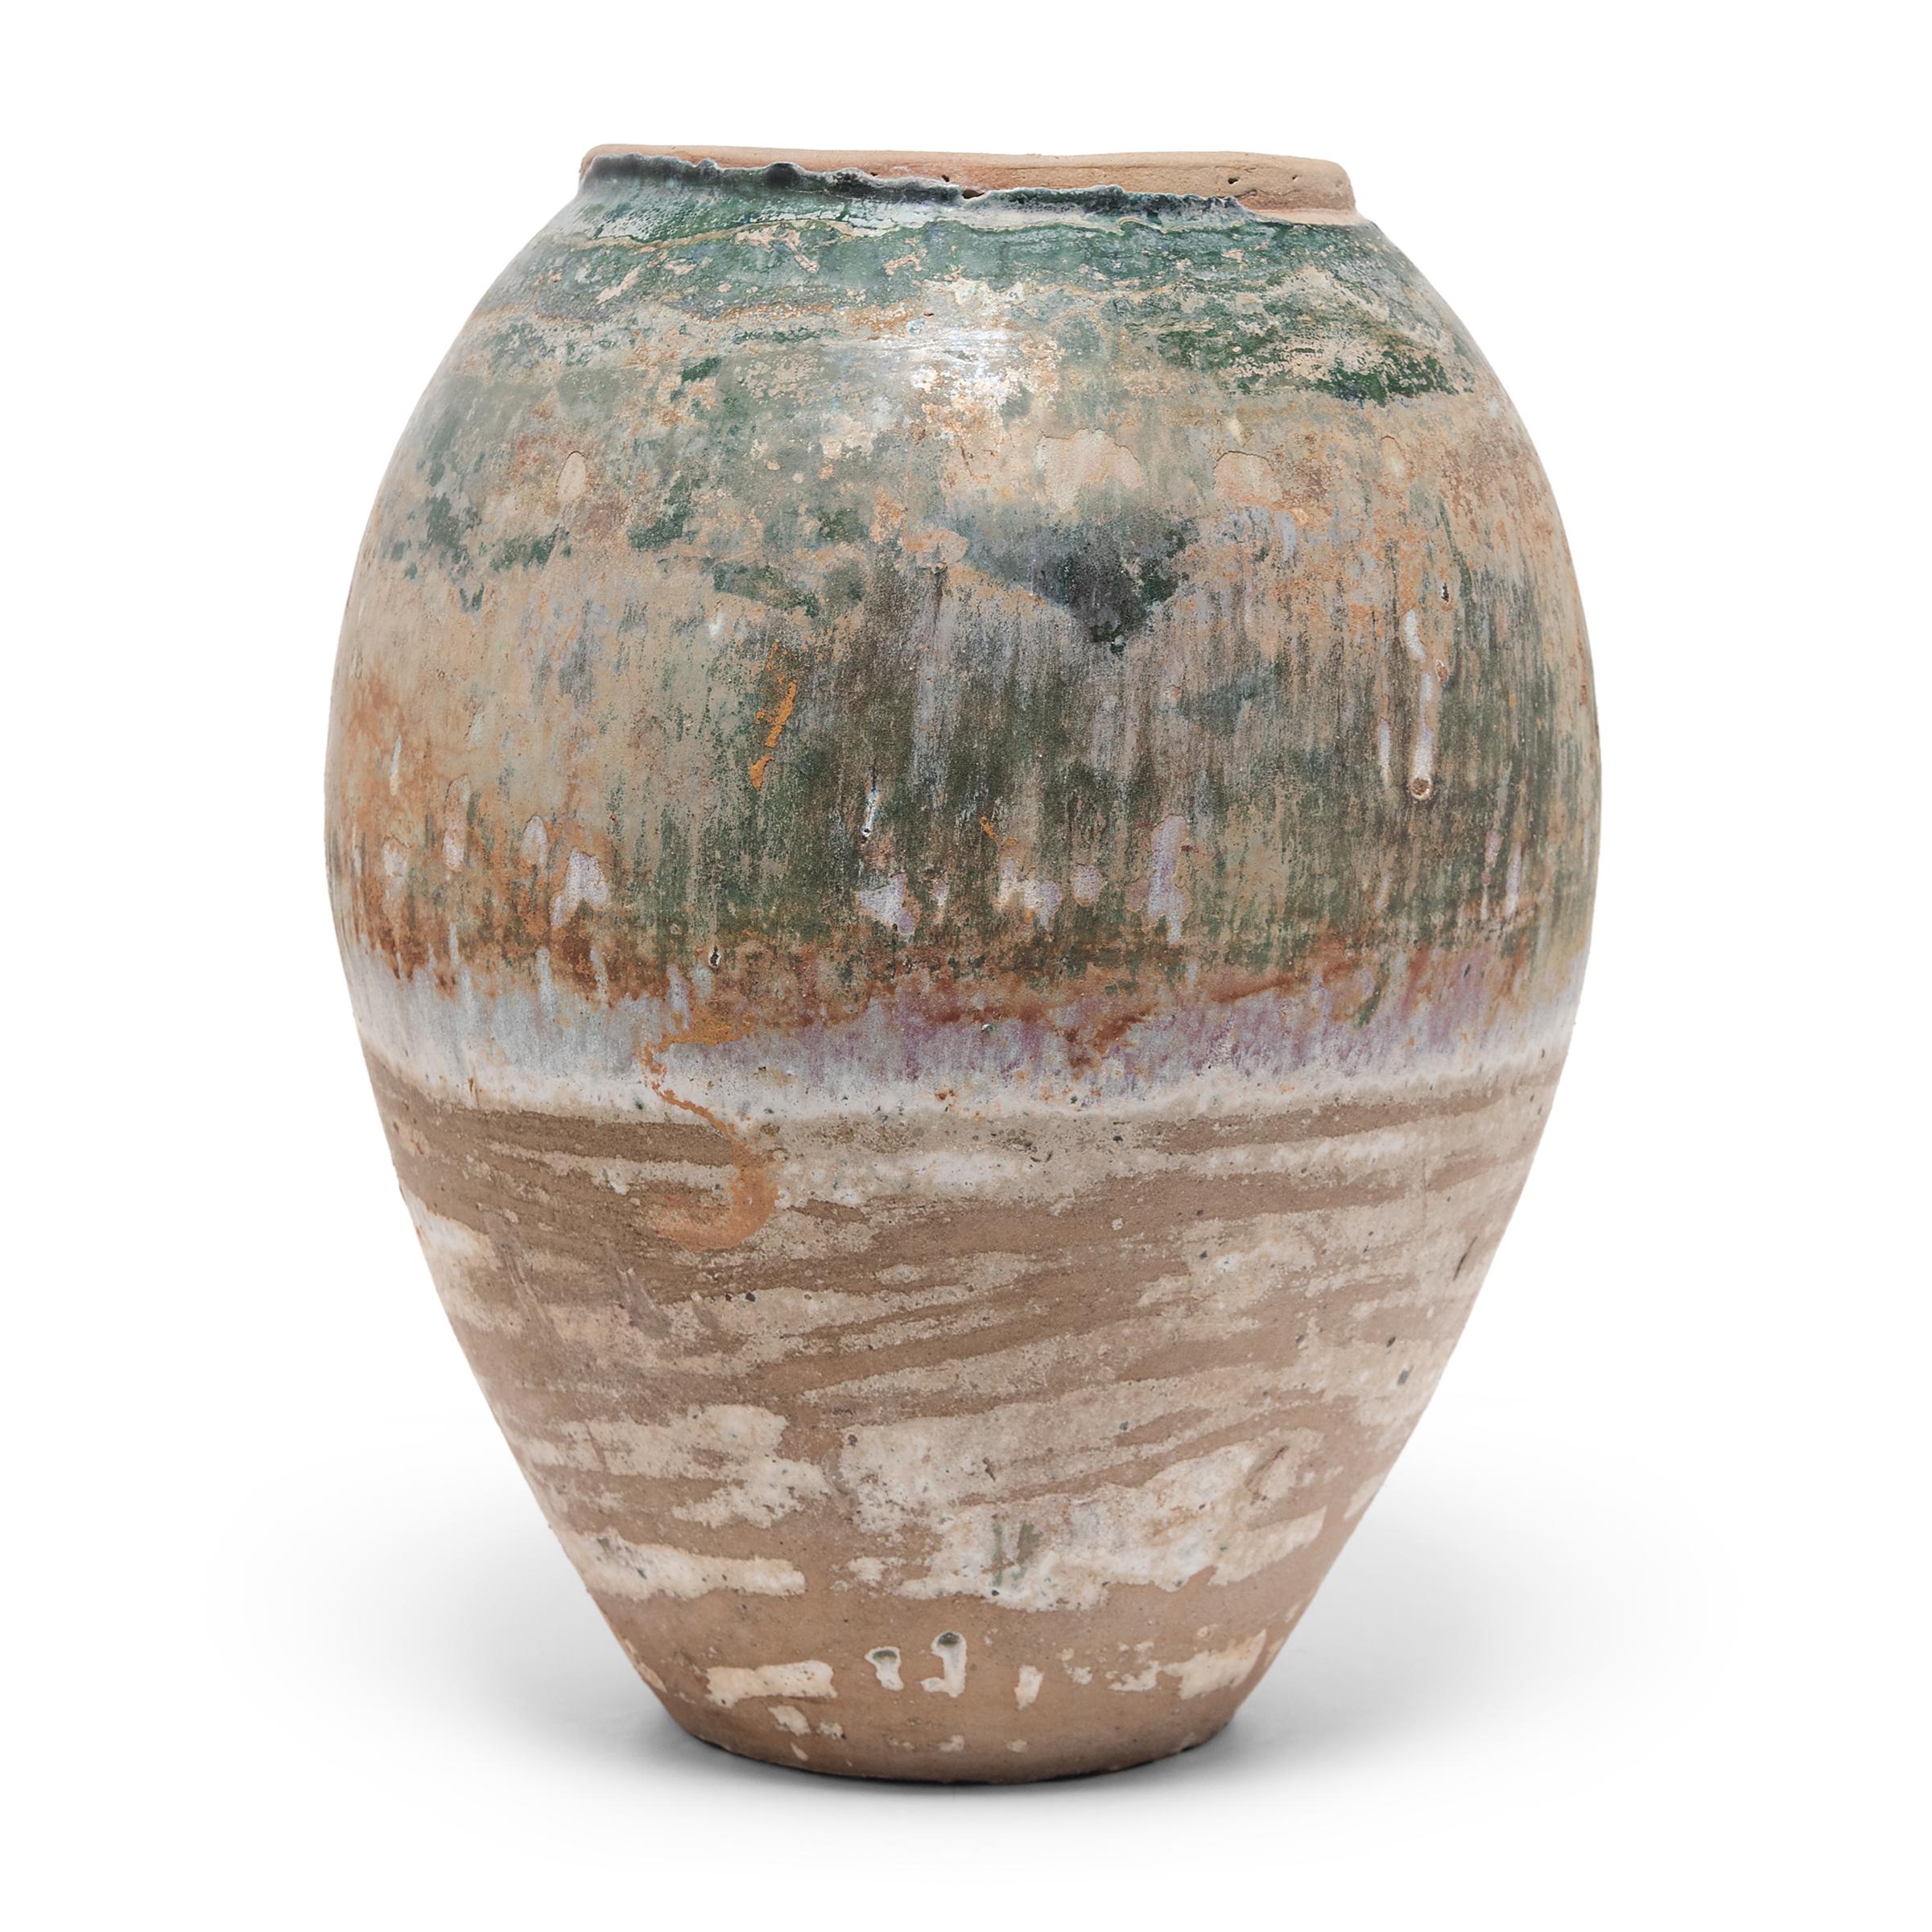 Charged with the humble task of storing dry goods, this large earthenware jar is distinguished by its tapered form and beautifully imperfect glazed exterior. The upper half of the vessel is coated in crackled overglaze that transitions from a glassy